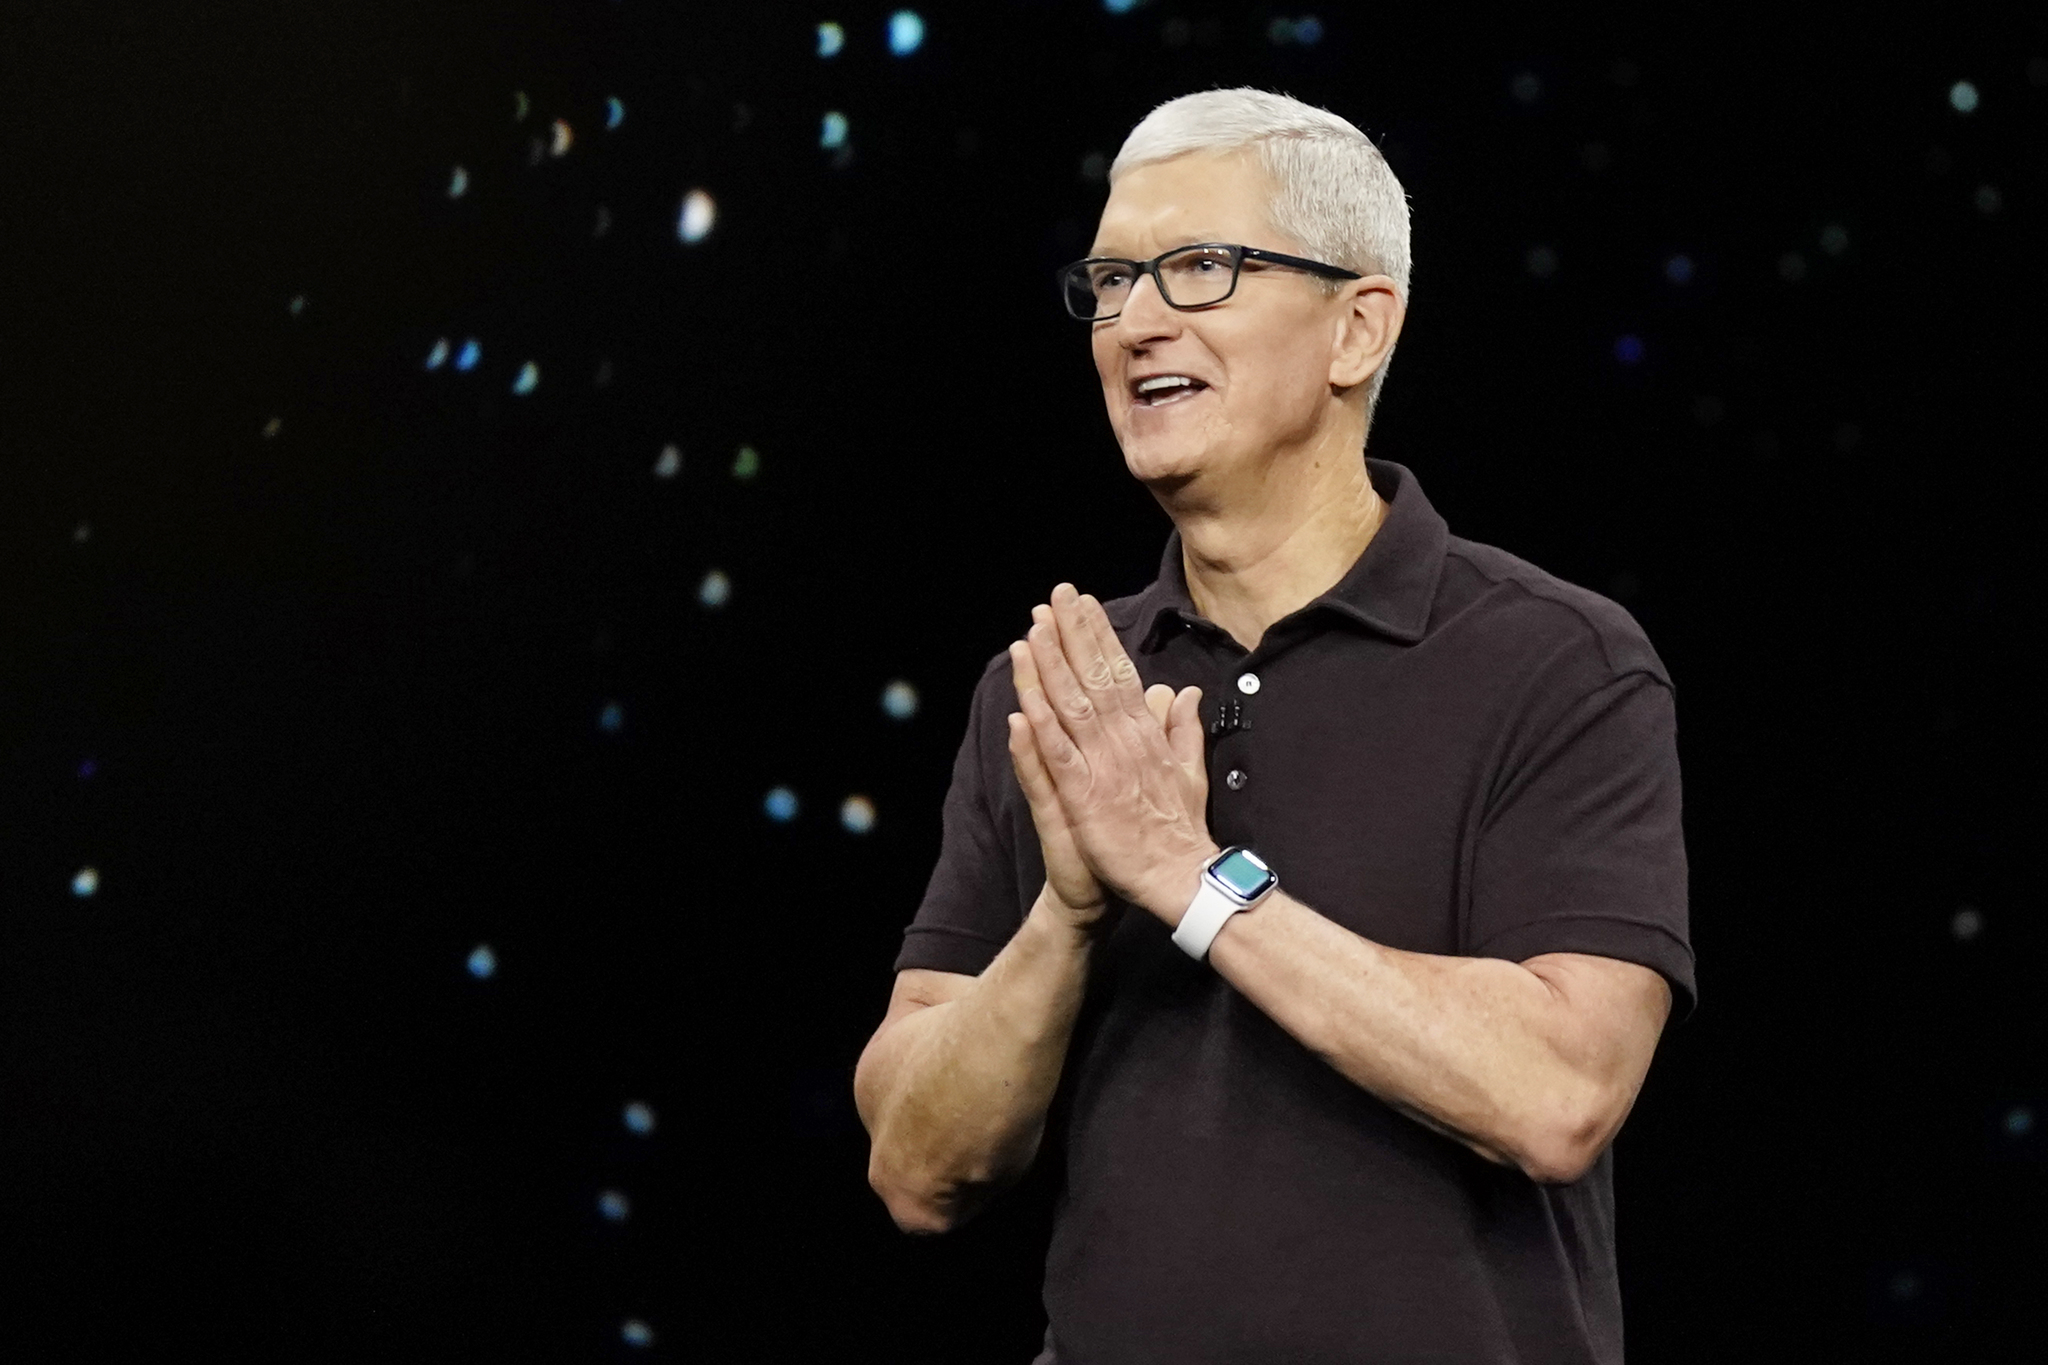 Tim Cook, Apple CEO, speaking at the event. -AP Photo